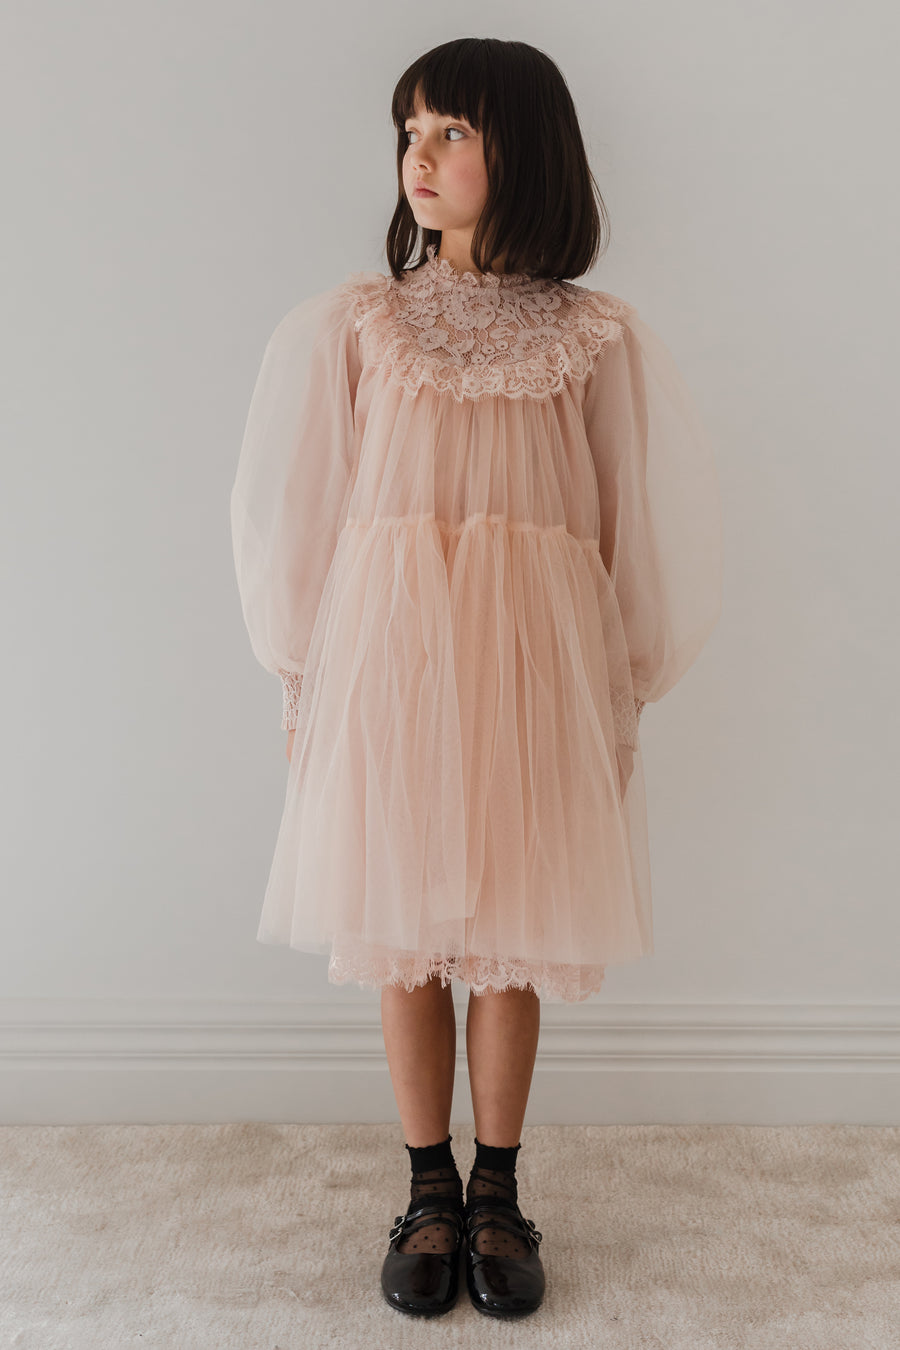 French lace tulle babydoll dress by Petite Amalie